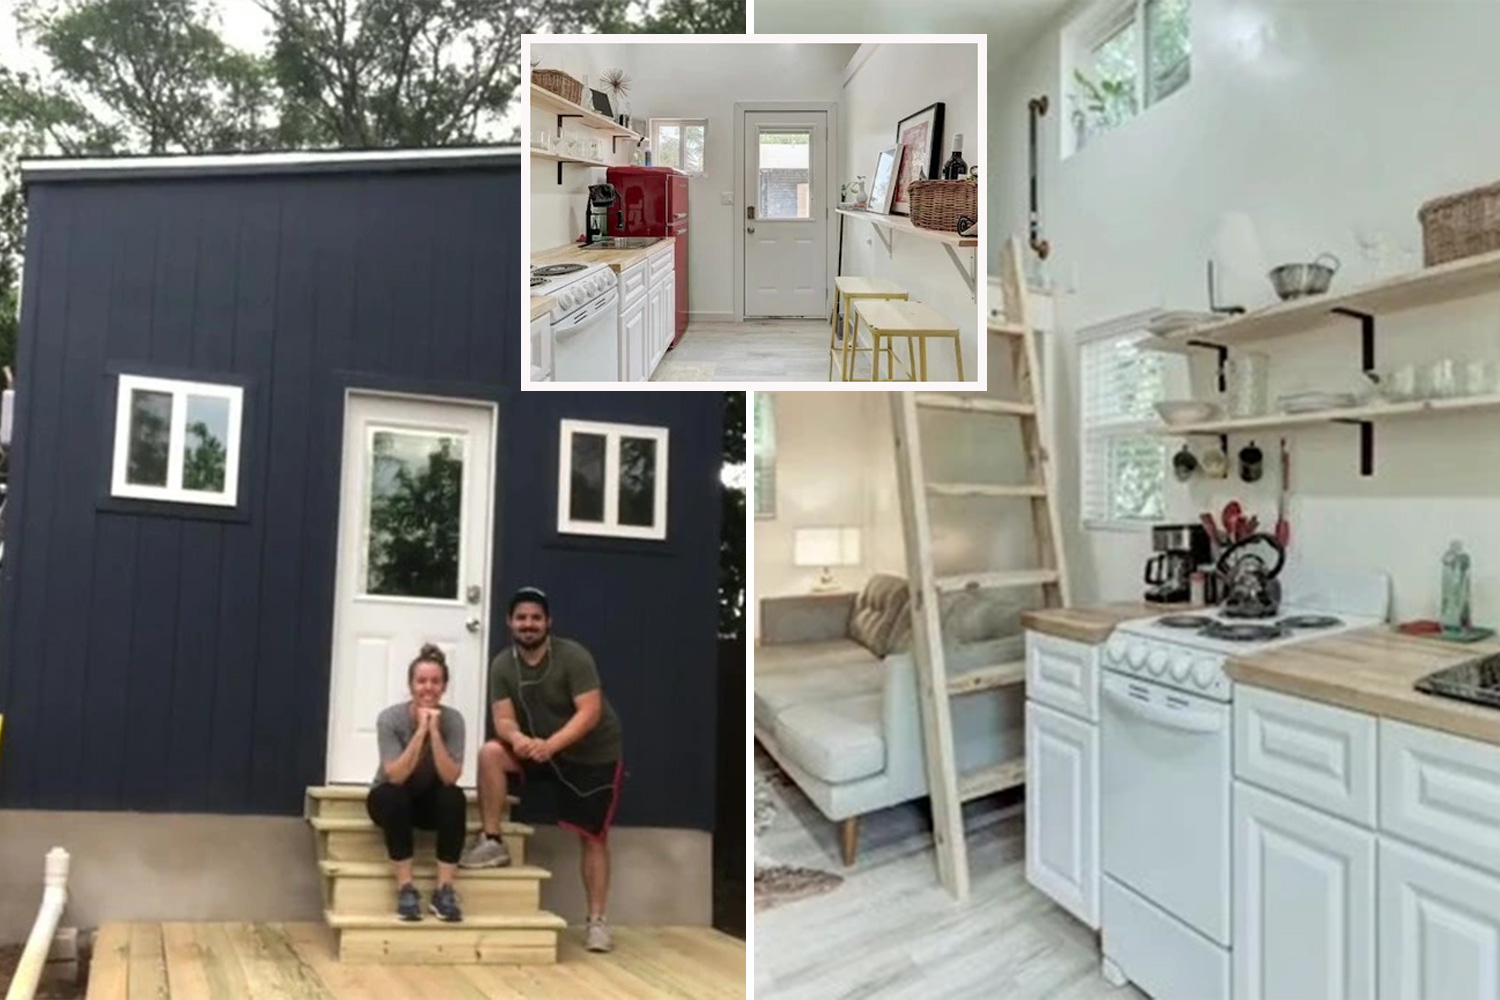 We built a tiny house in our garden & Airbnb it out for €2,865 a month